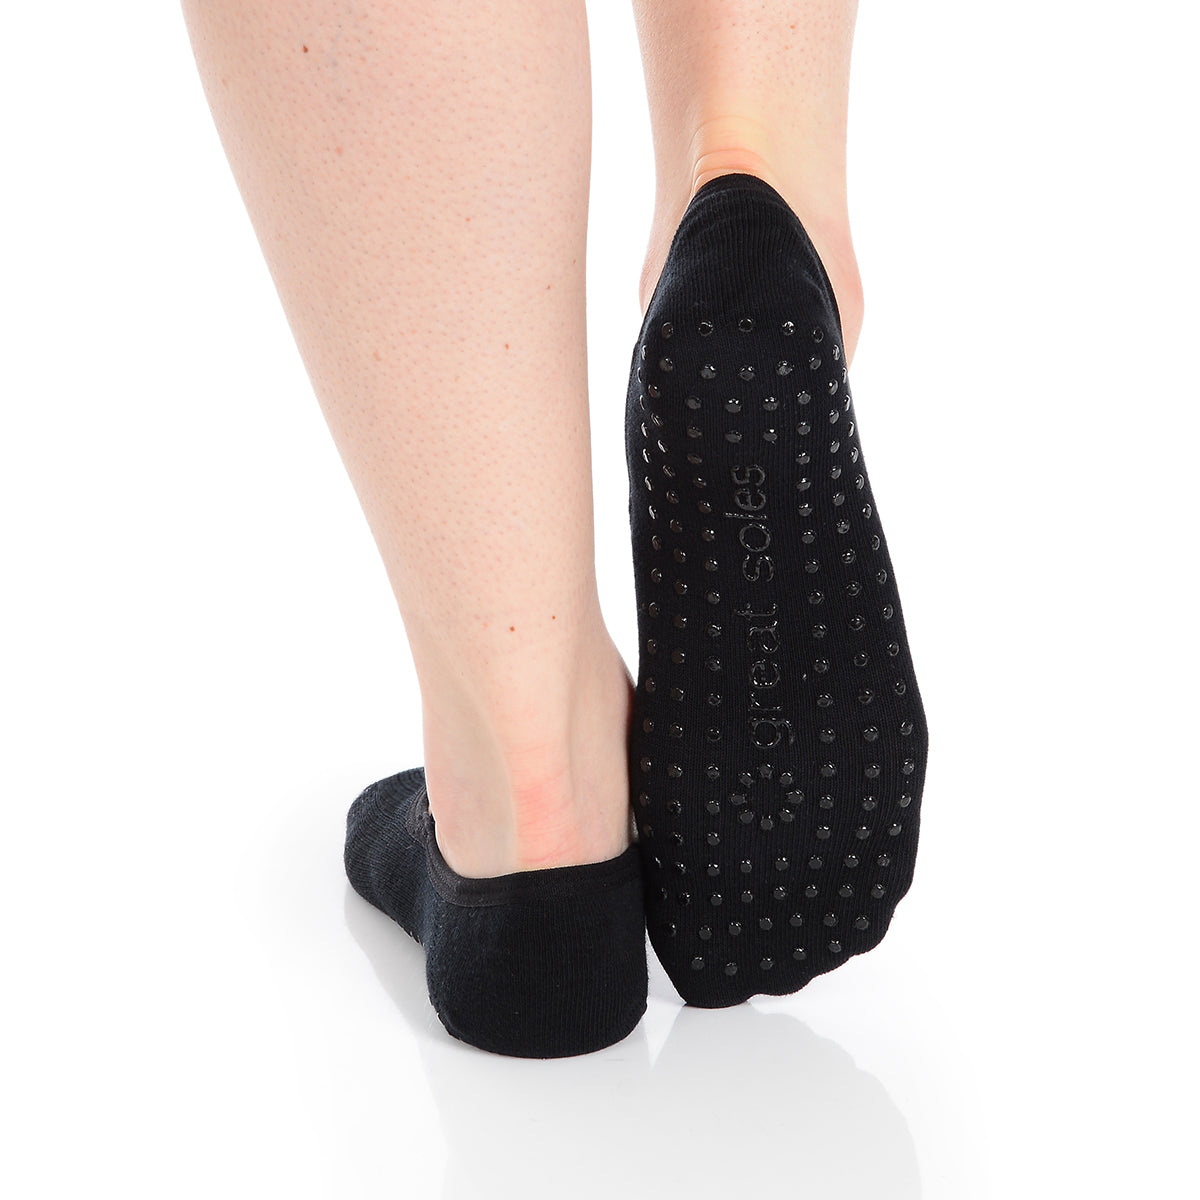 PROBEROS Women's Yoga Sock Cotton Non Slip Barre Grip Finger Open Toe Ankle  Length Socks With Grips (Black With Polka) : : Fashion